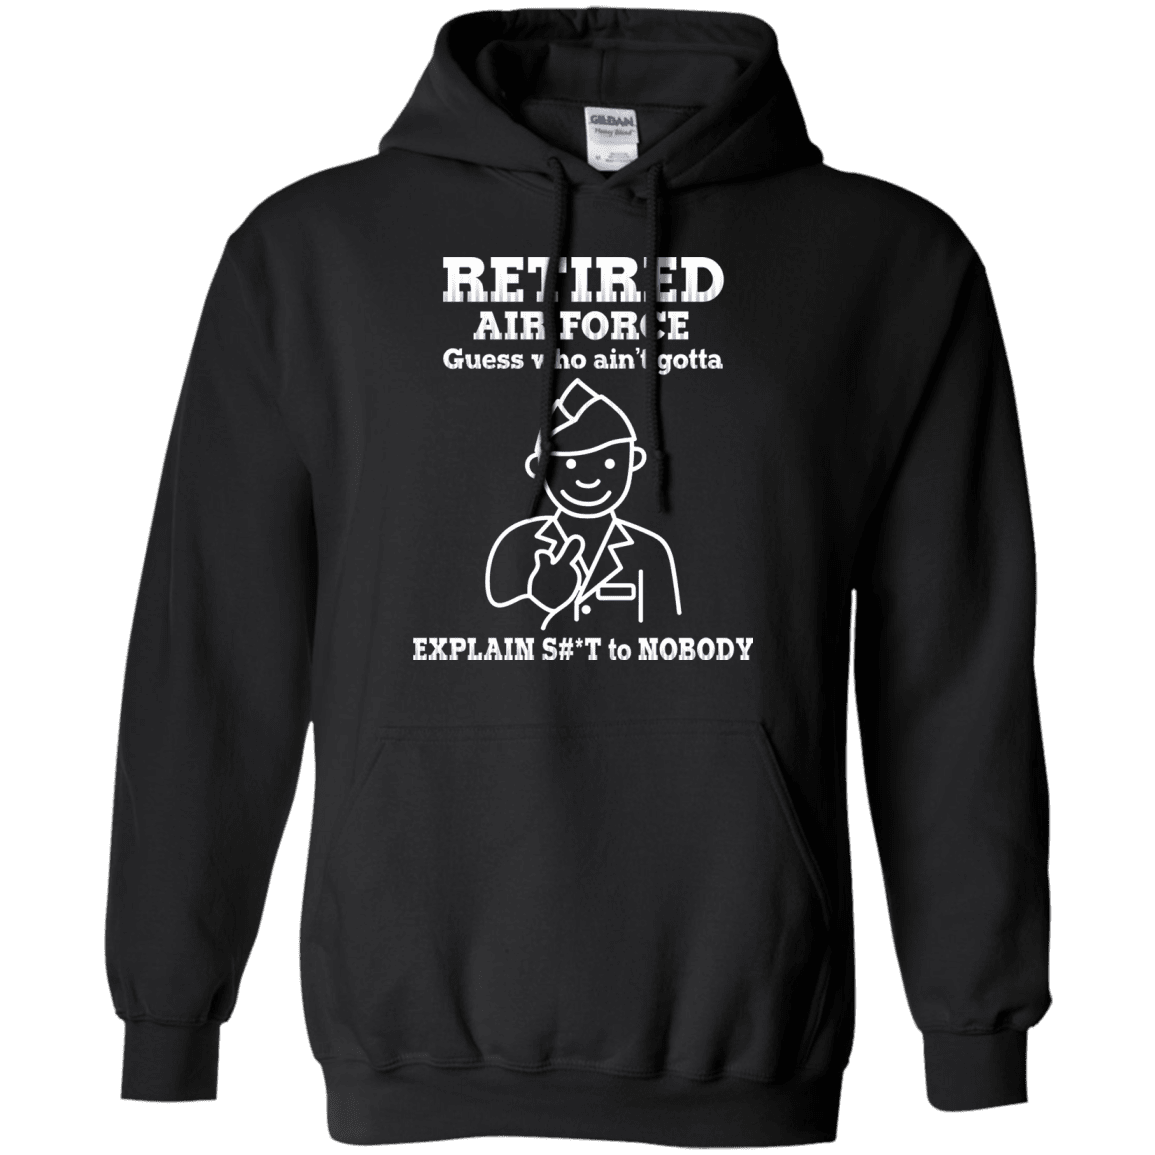 Retired Air Force Guess Who Ain't gotta Explain Men Front T Shirts-TShirt-USAF-Veterans Nation